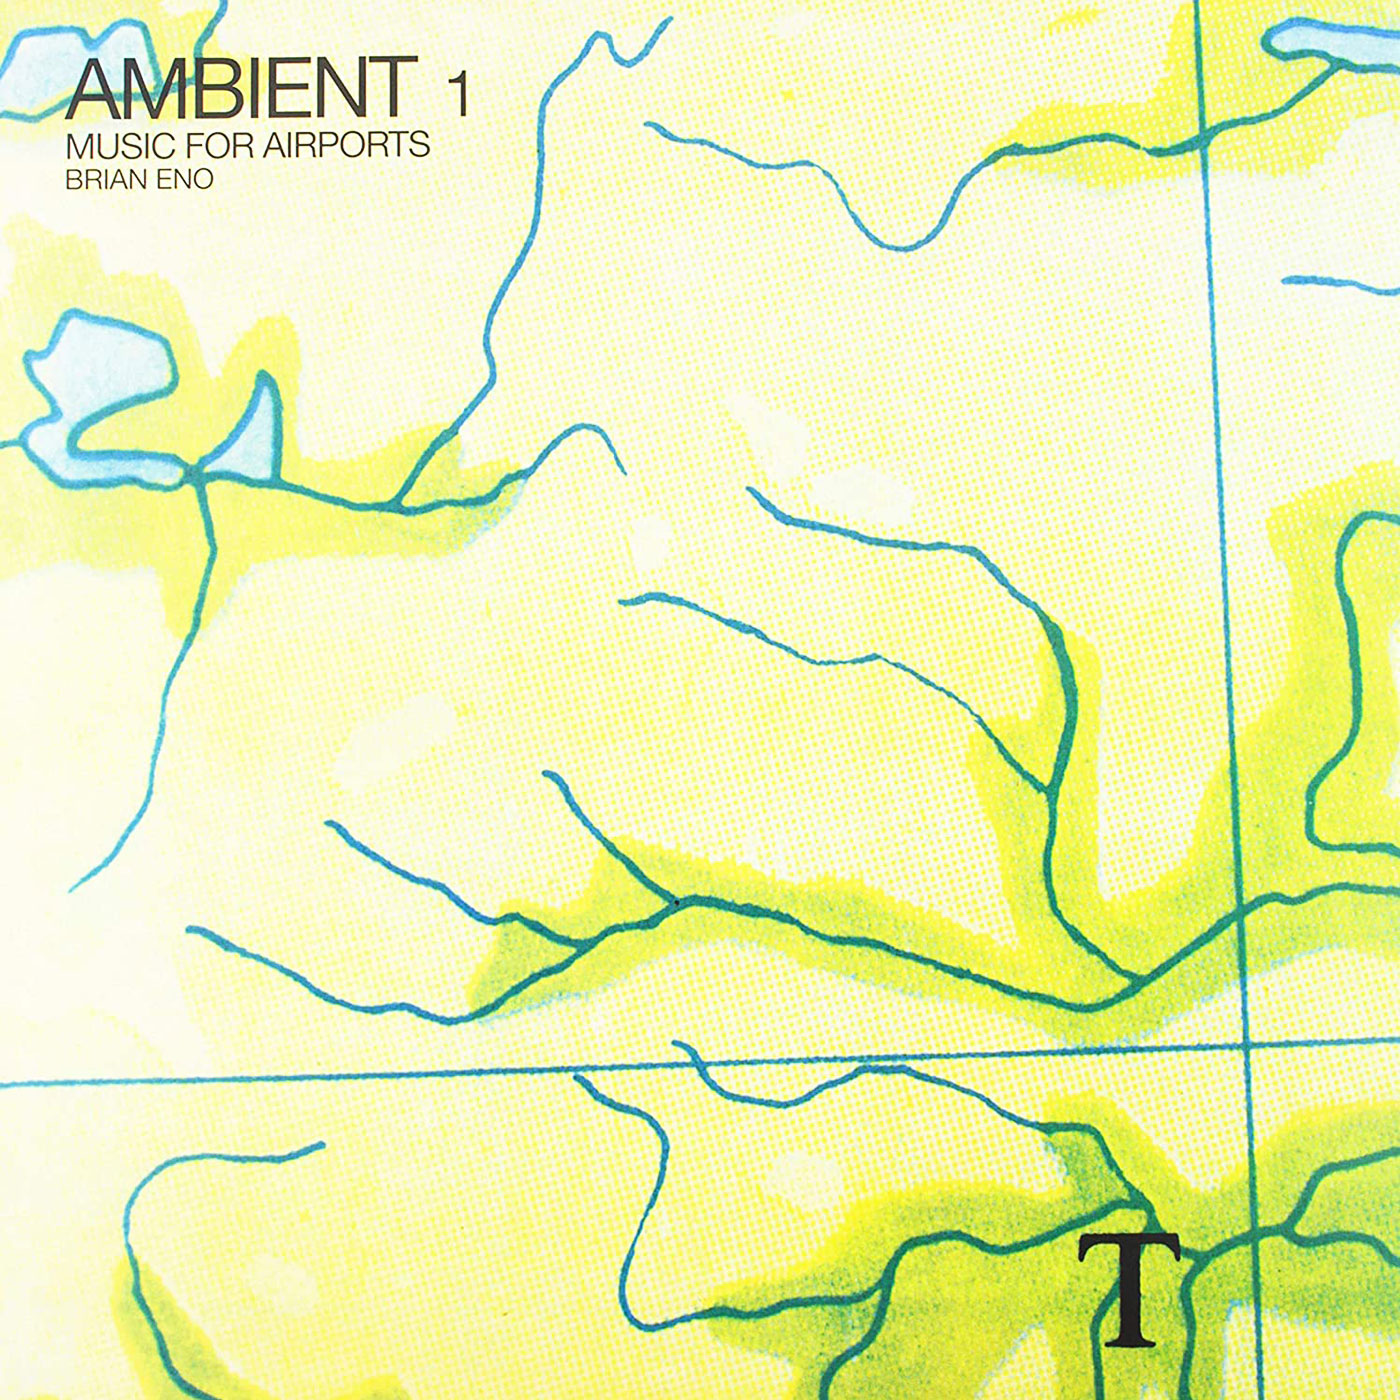 425 Brian Eno – Ambient 1 Music for Airports